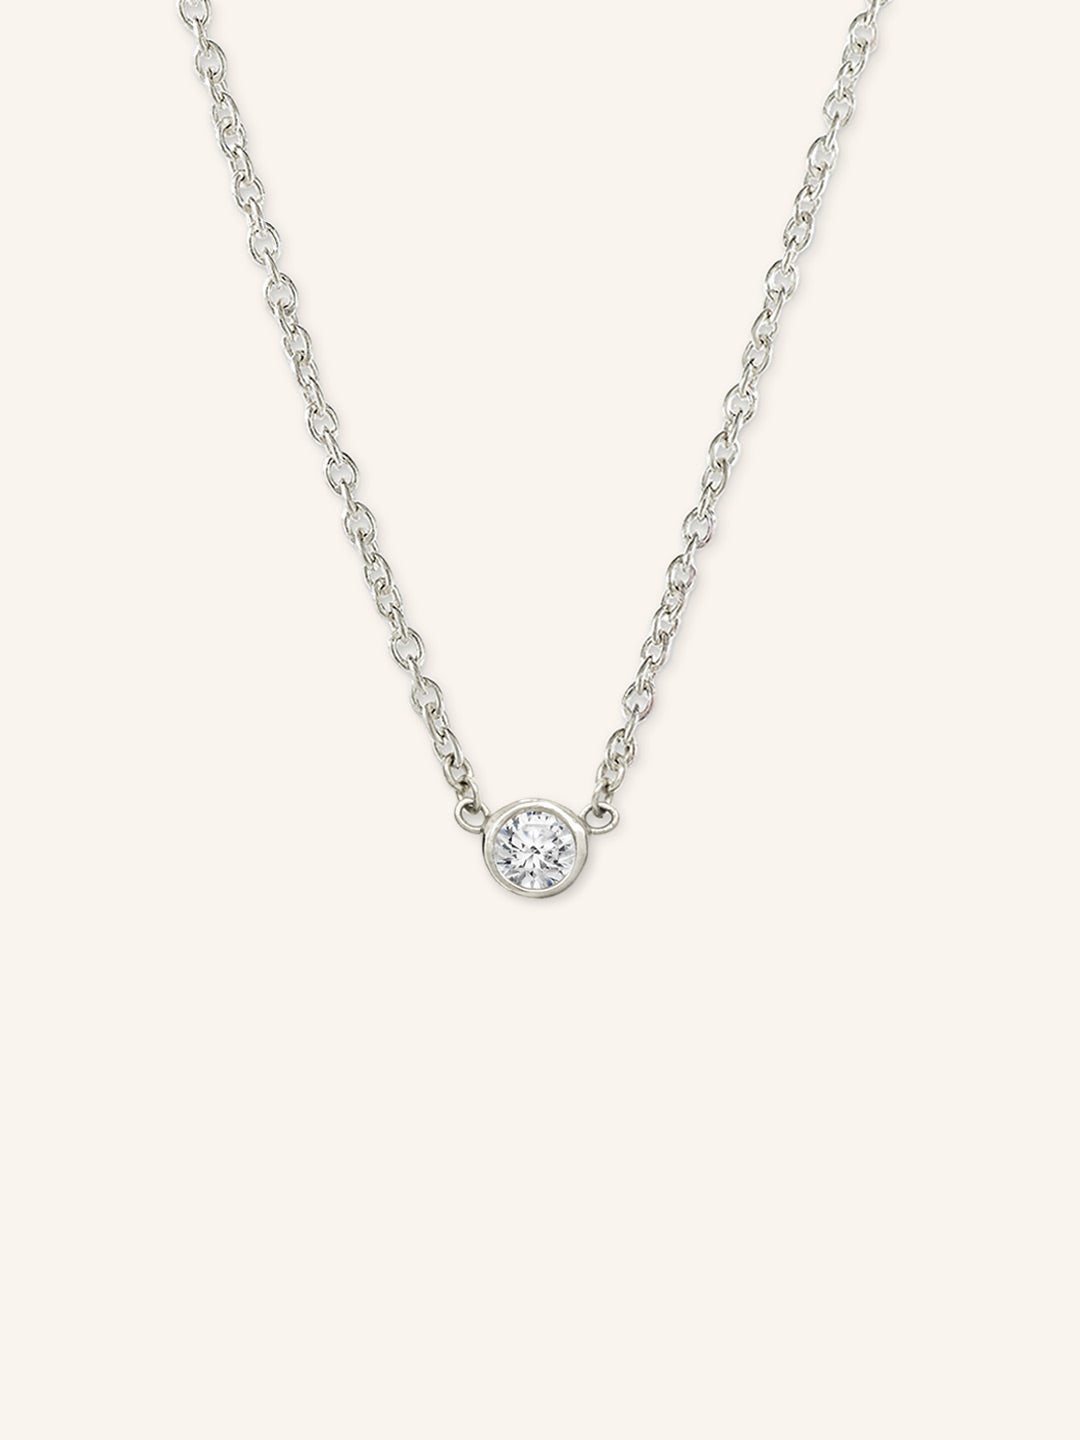 Fall into Autumn White Sapphire Necklace